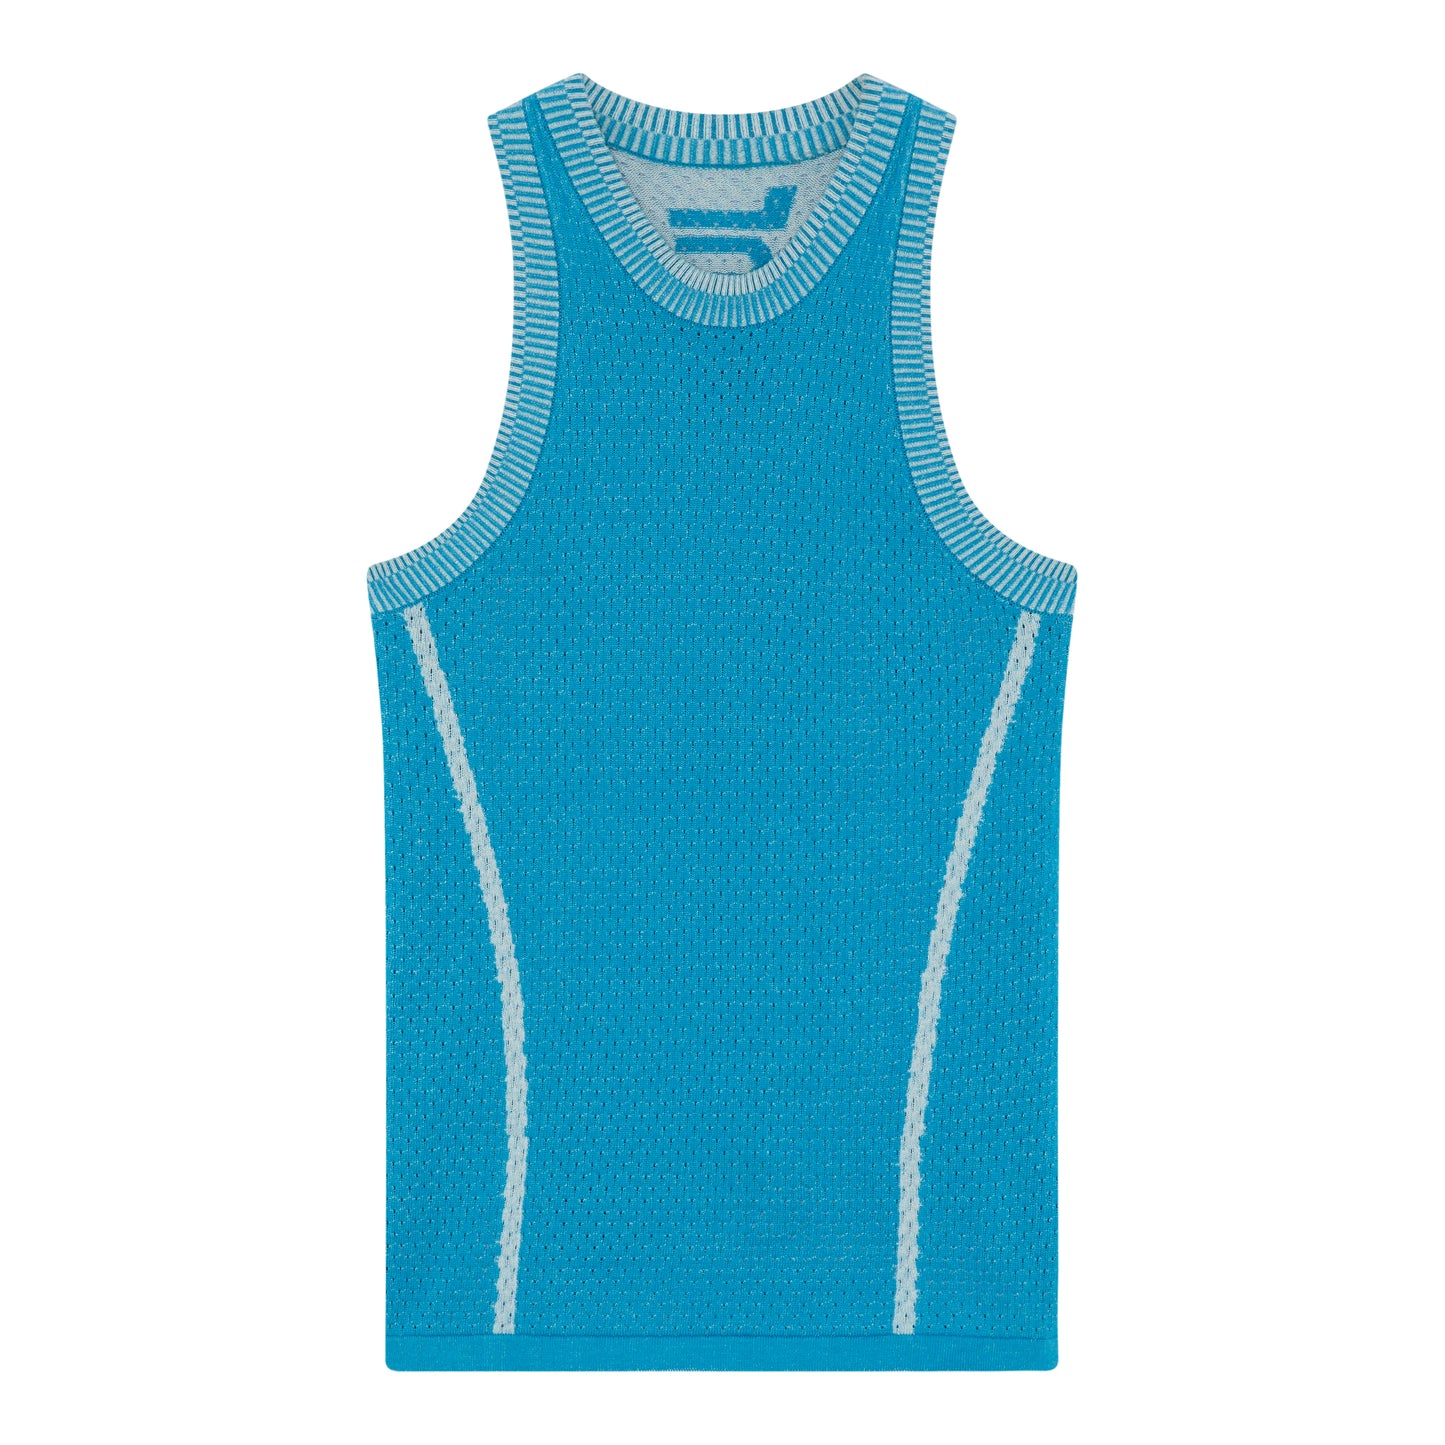 KNITTED MESH VEST - TURQUOISE